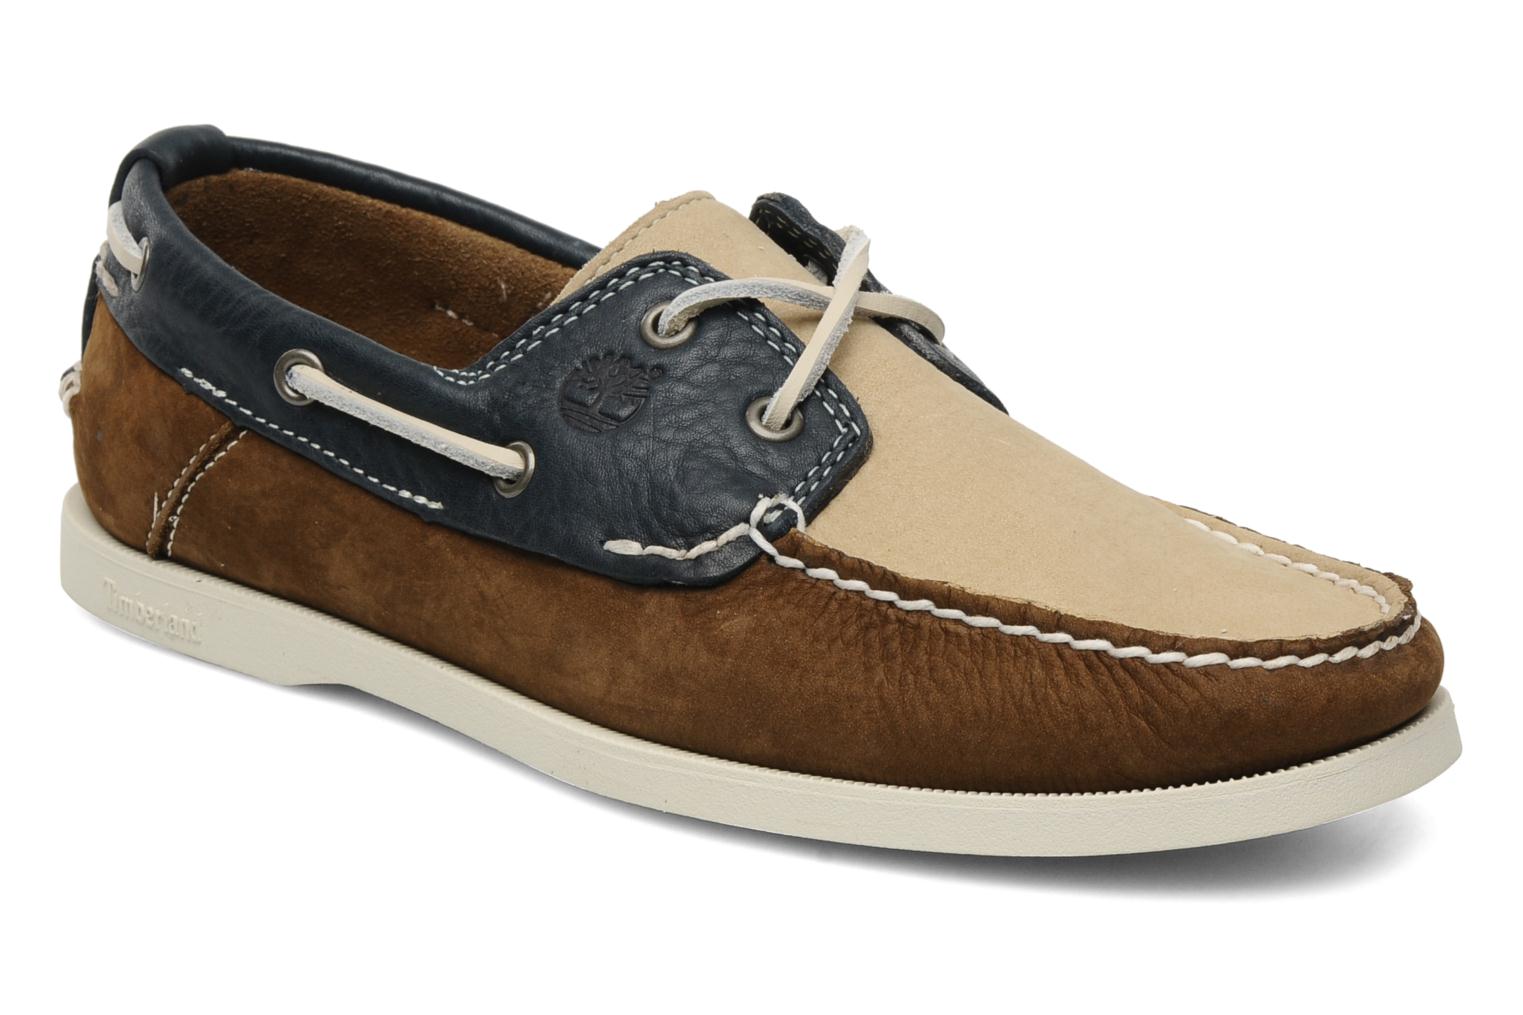 Foto Náuticos Timberland Earthkeepers Heritage Boat 2 Eye Hombre